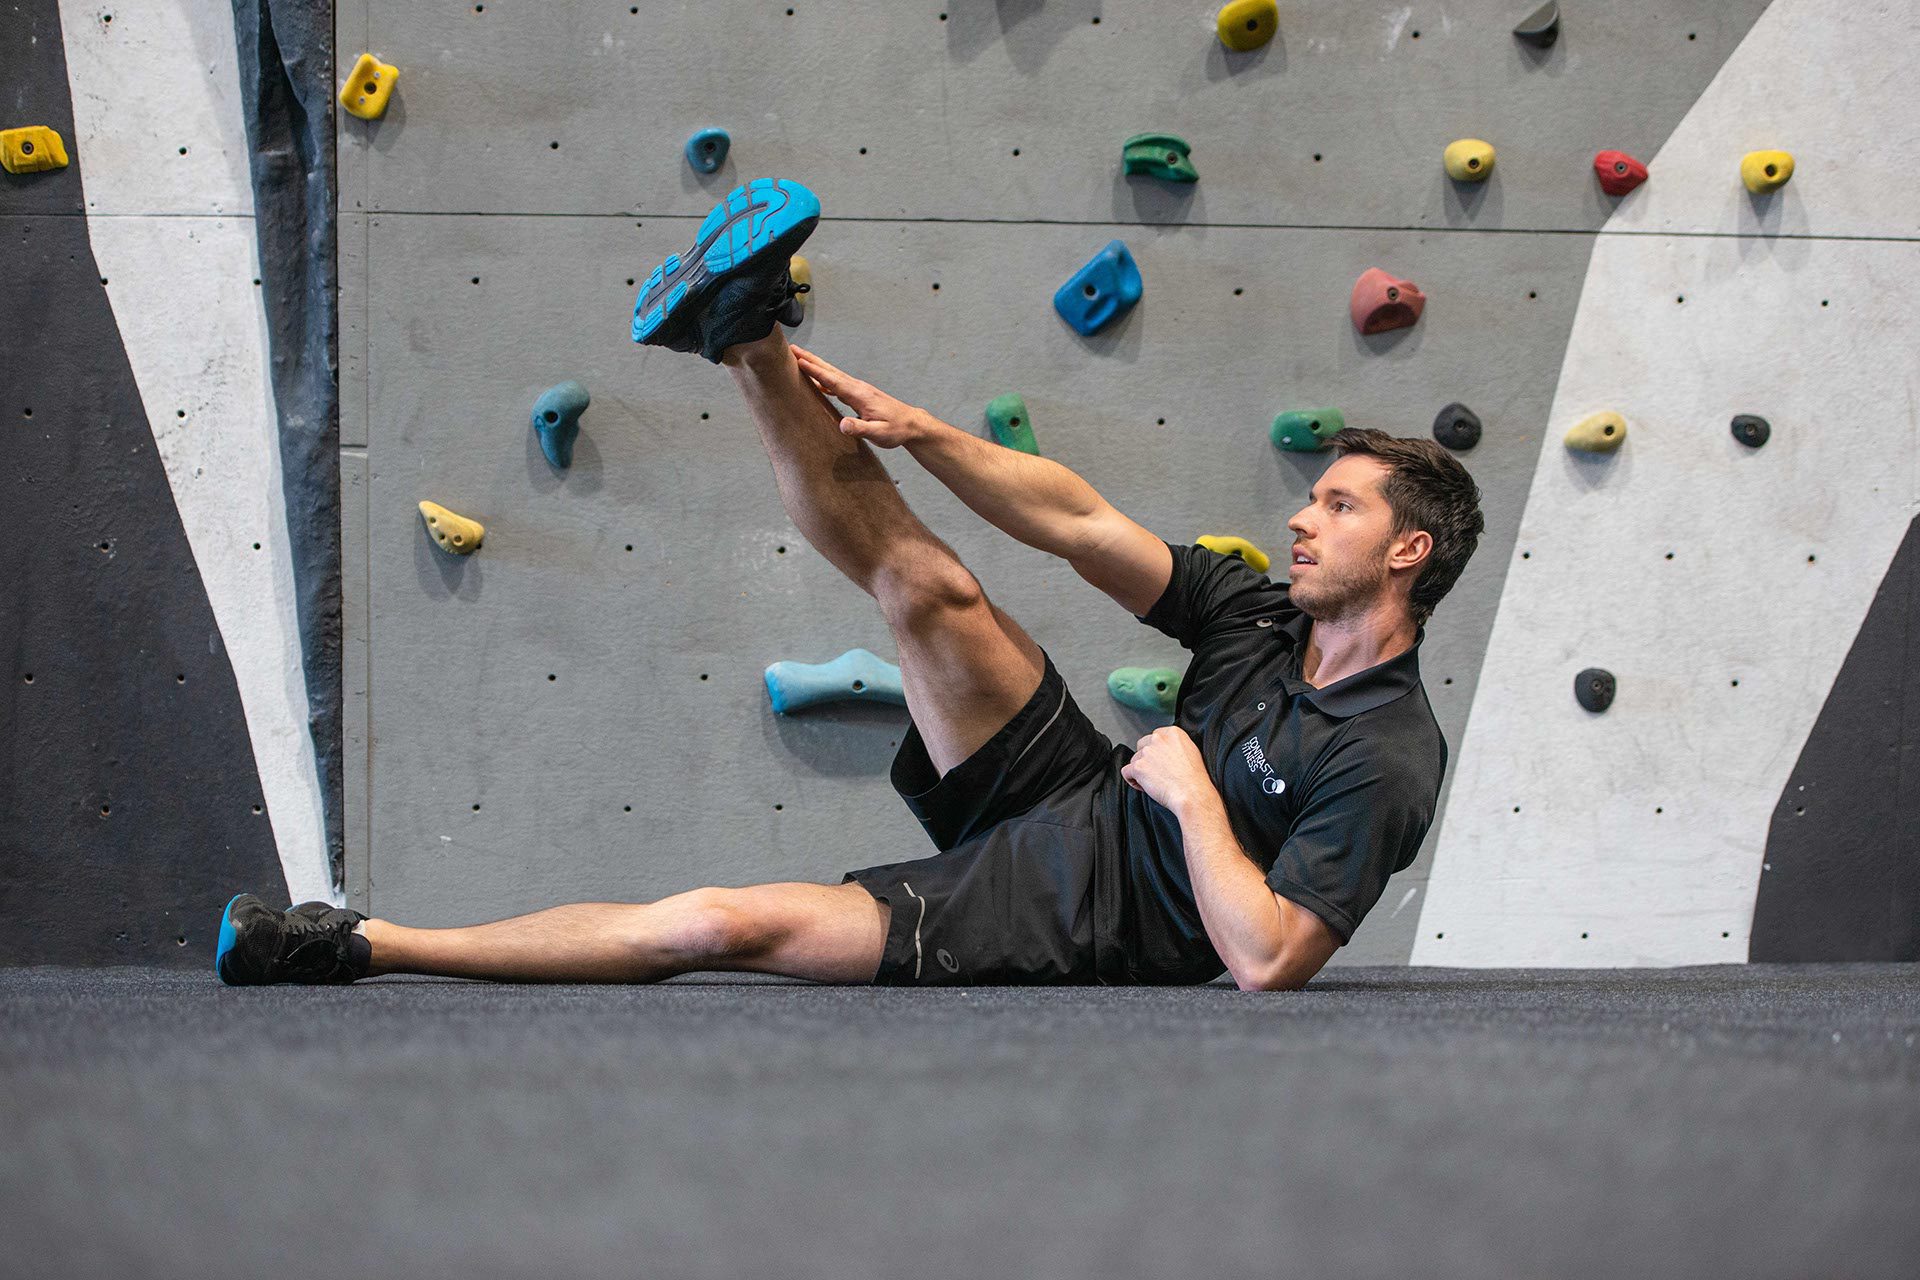 5 Grip Strength Exercises for Rock Climbing and Bouldering